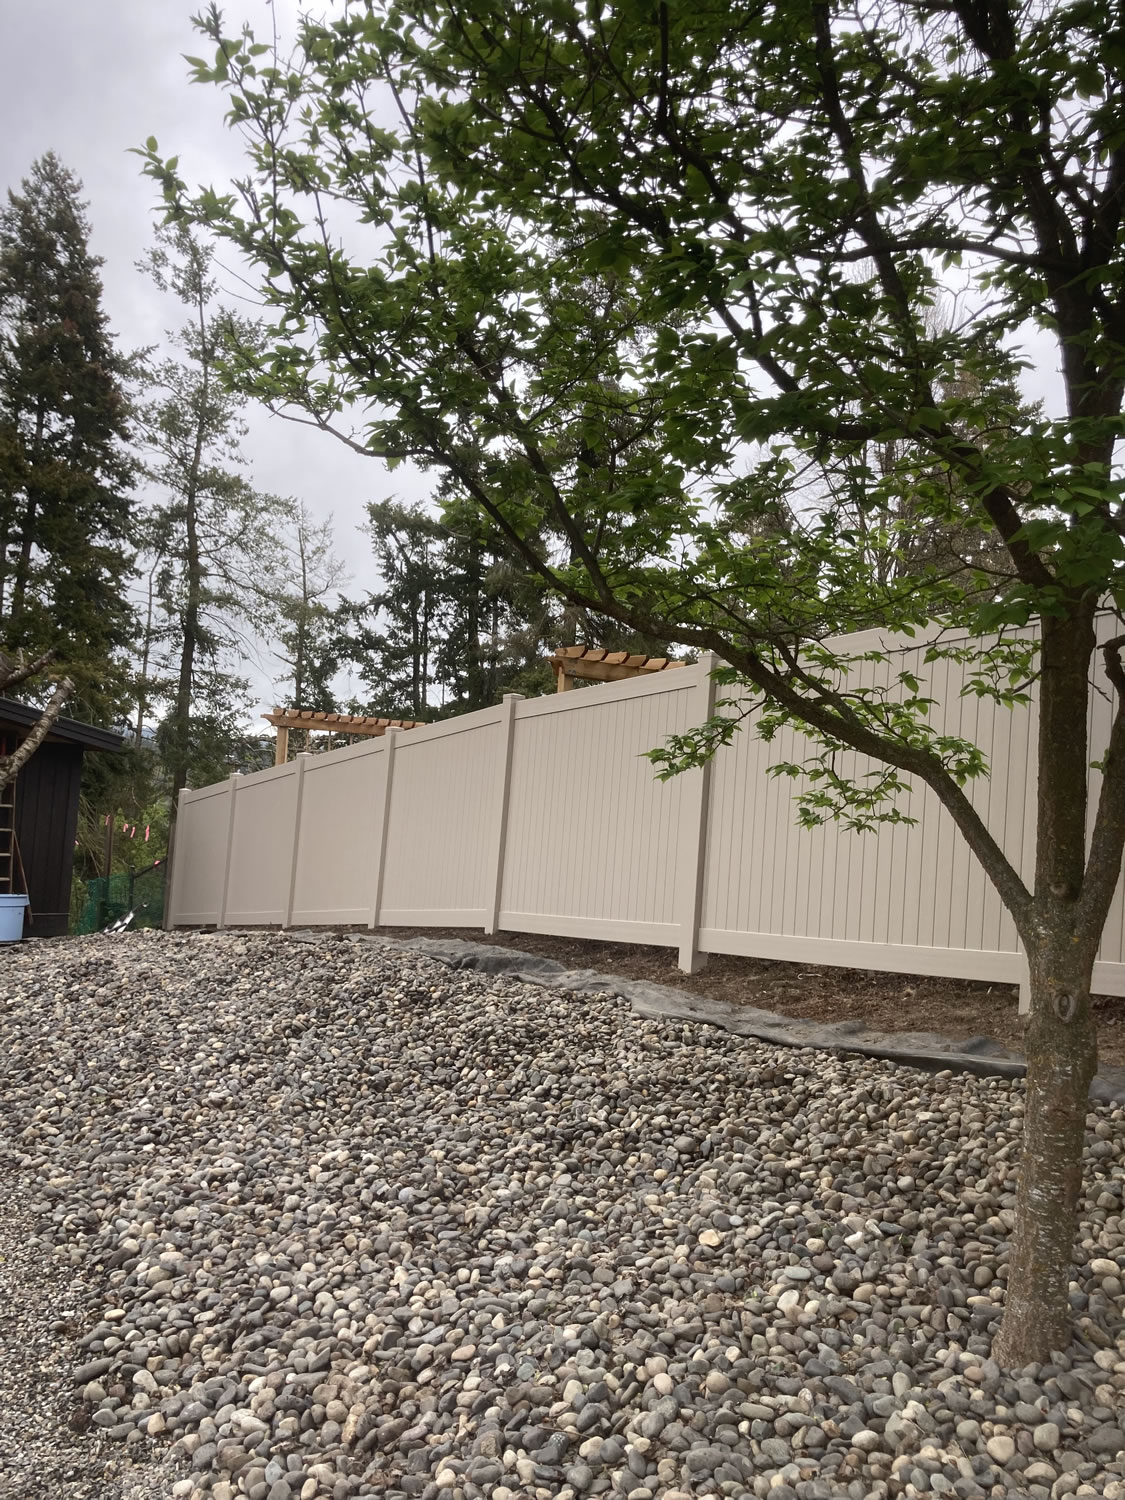 Vinyl fence and landscaping